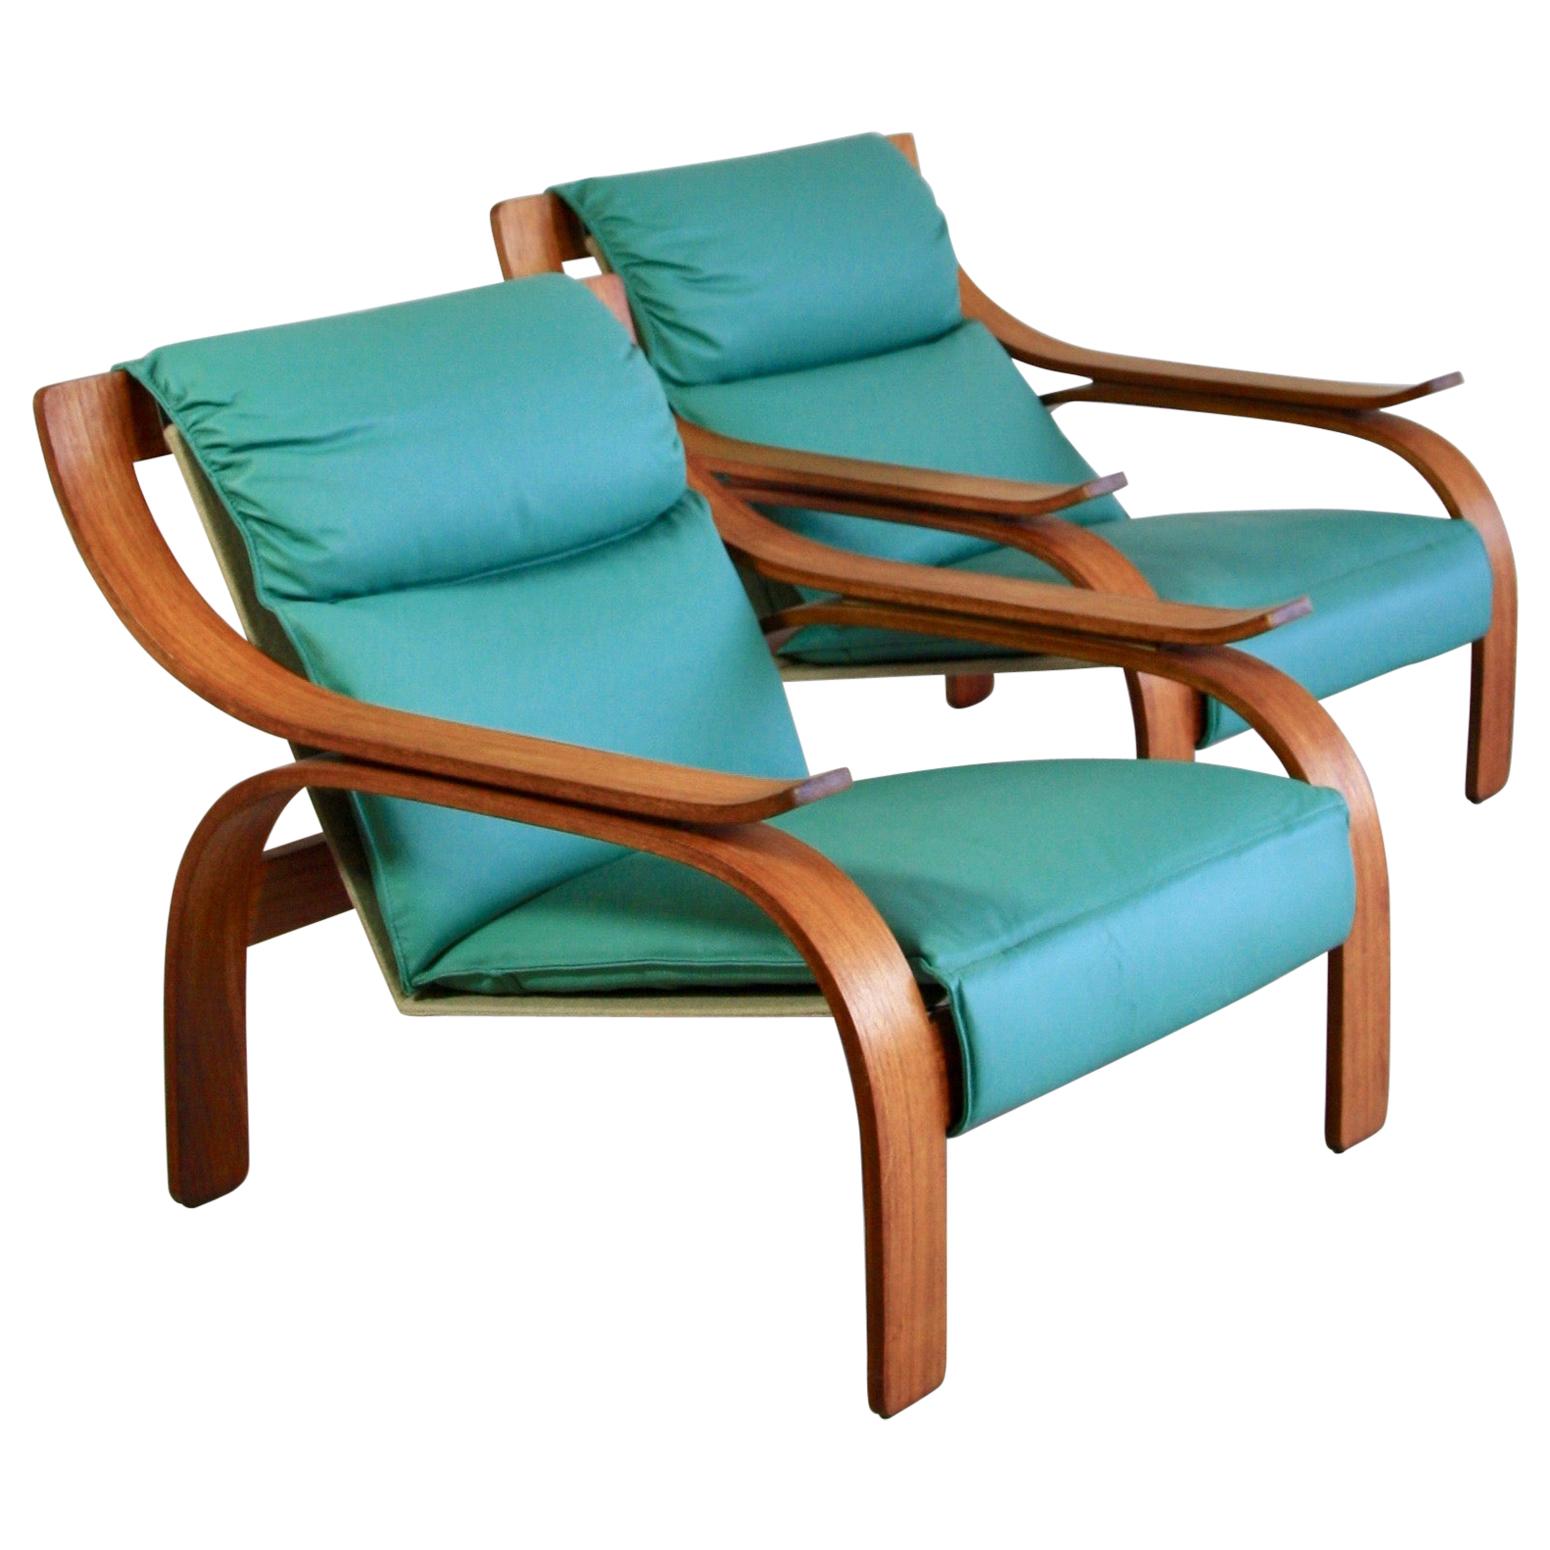 Pair of Green Leather Armchairs by Marco Zanuso, 1964